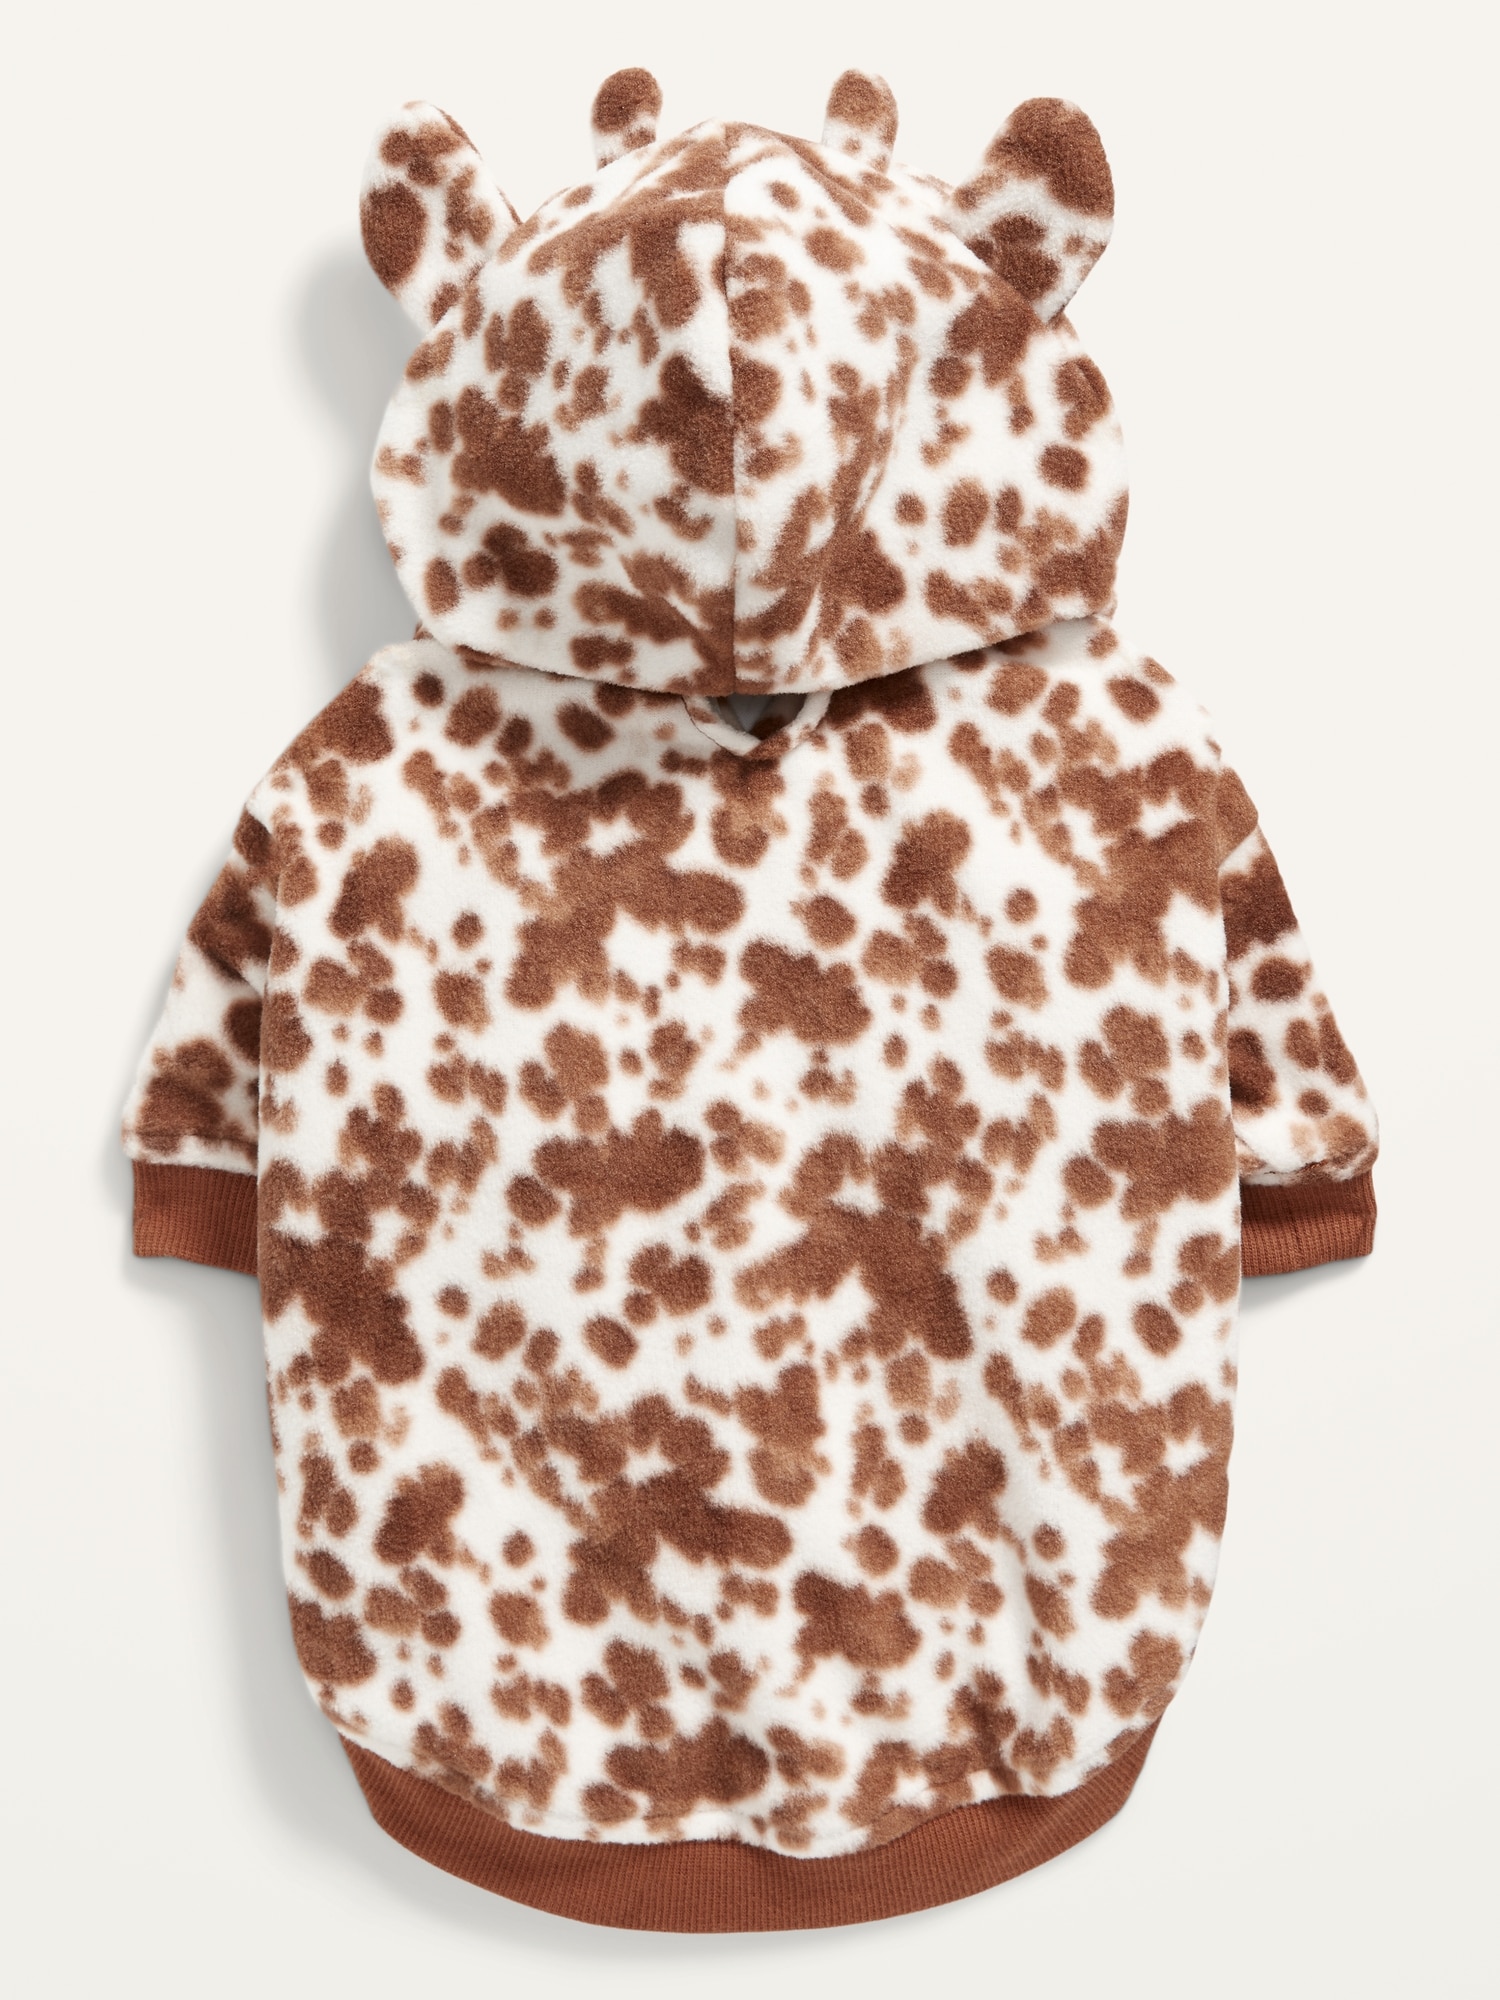 Microfleece Critter Hoodie for Pets | Old Navy